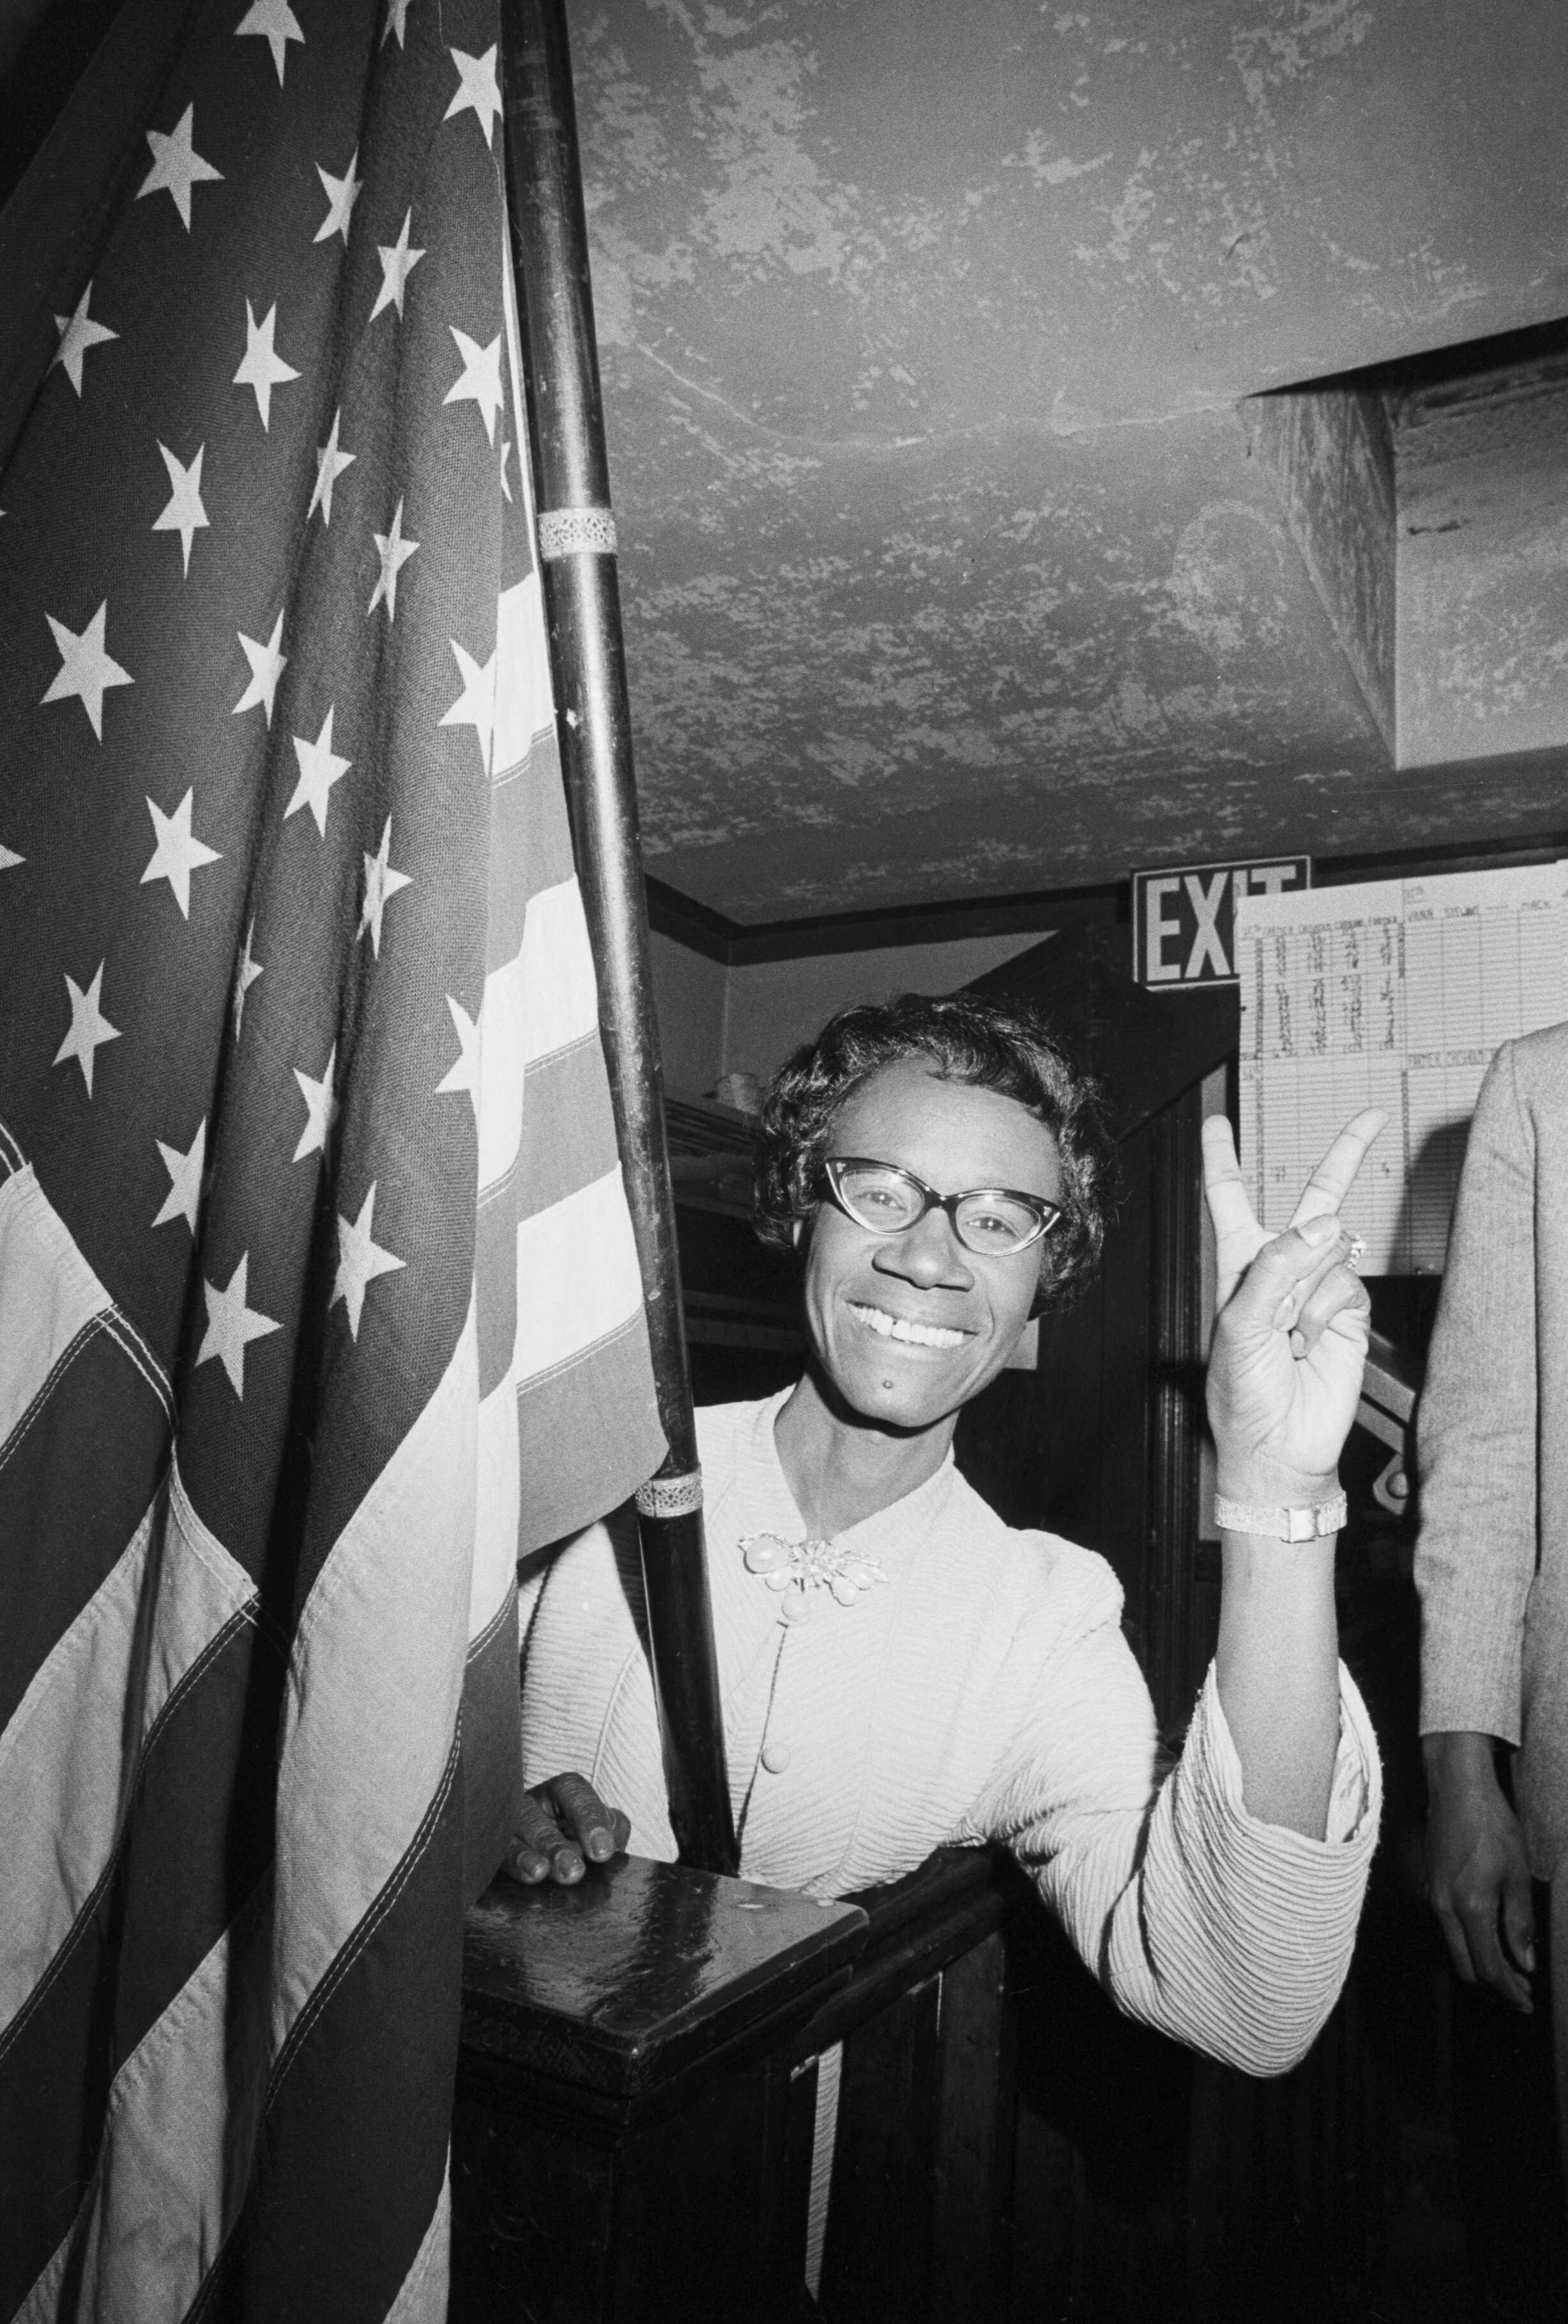 Photograph of Shirley Chisholm gives victory sign after winning election to Congress